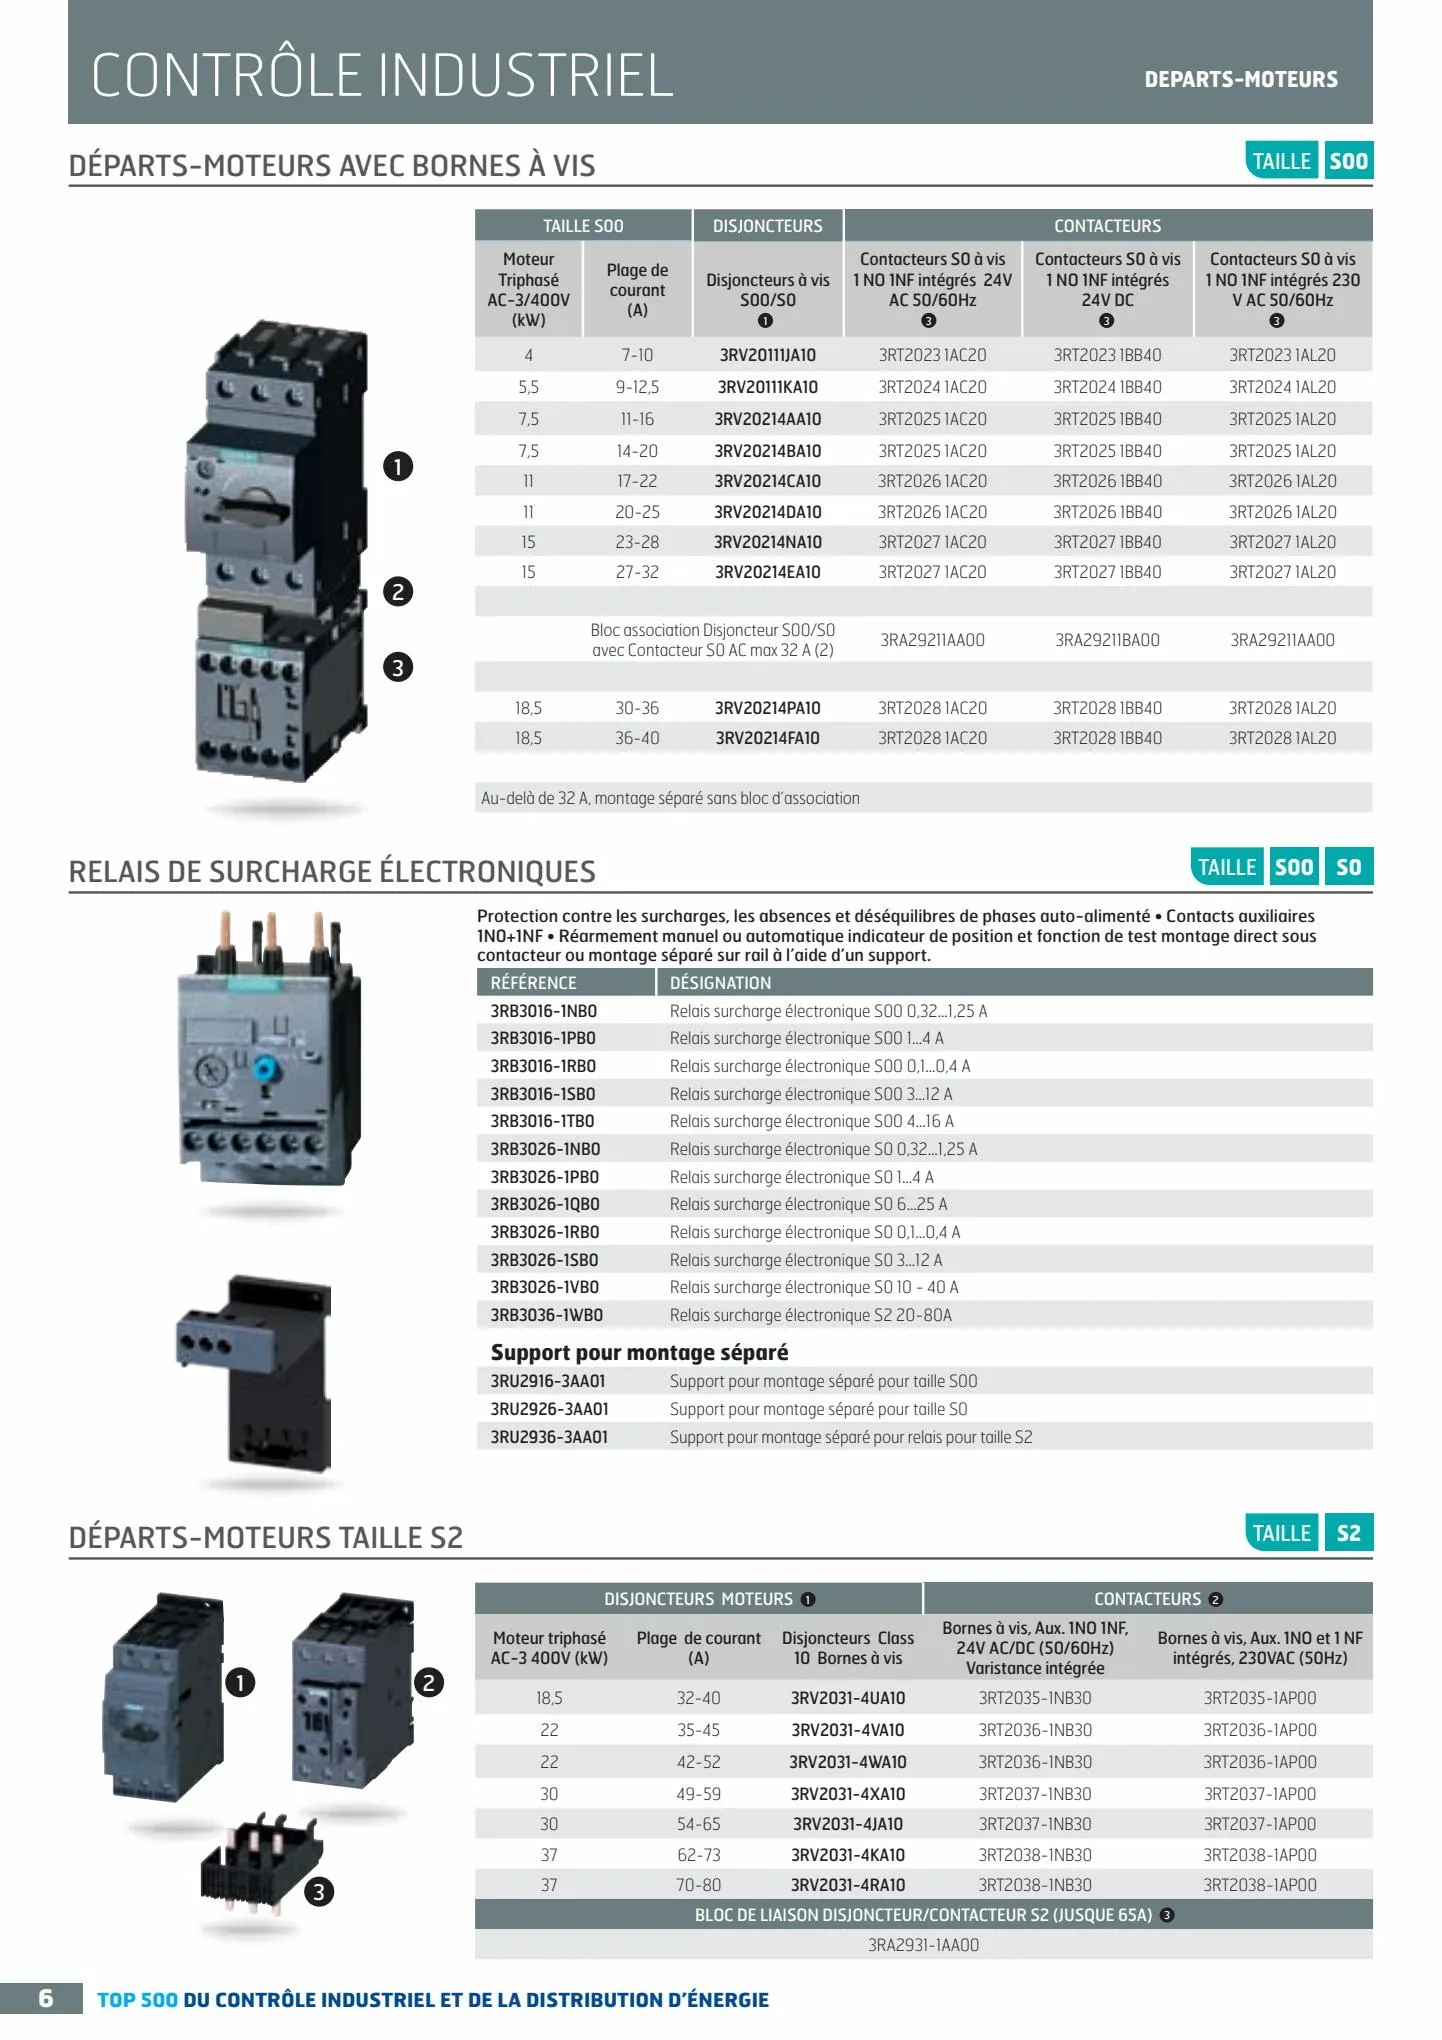 Catalogue TOP 500 siemens, page 00006